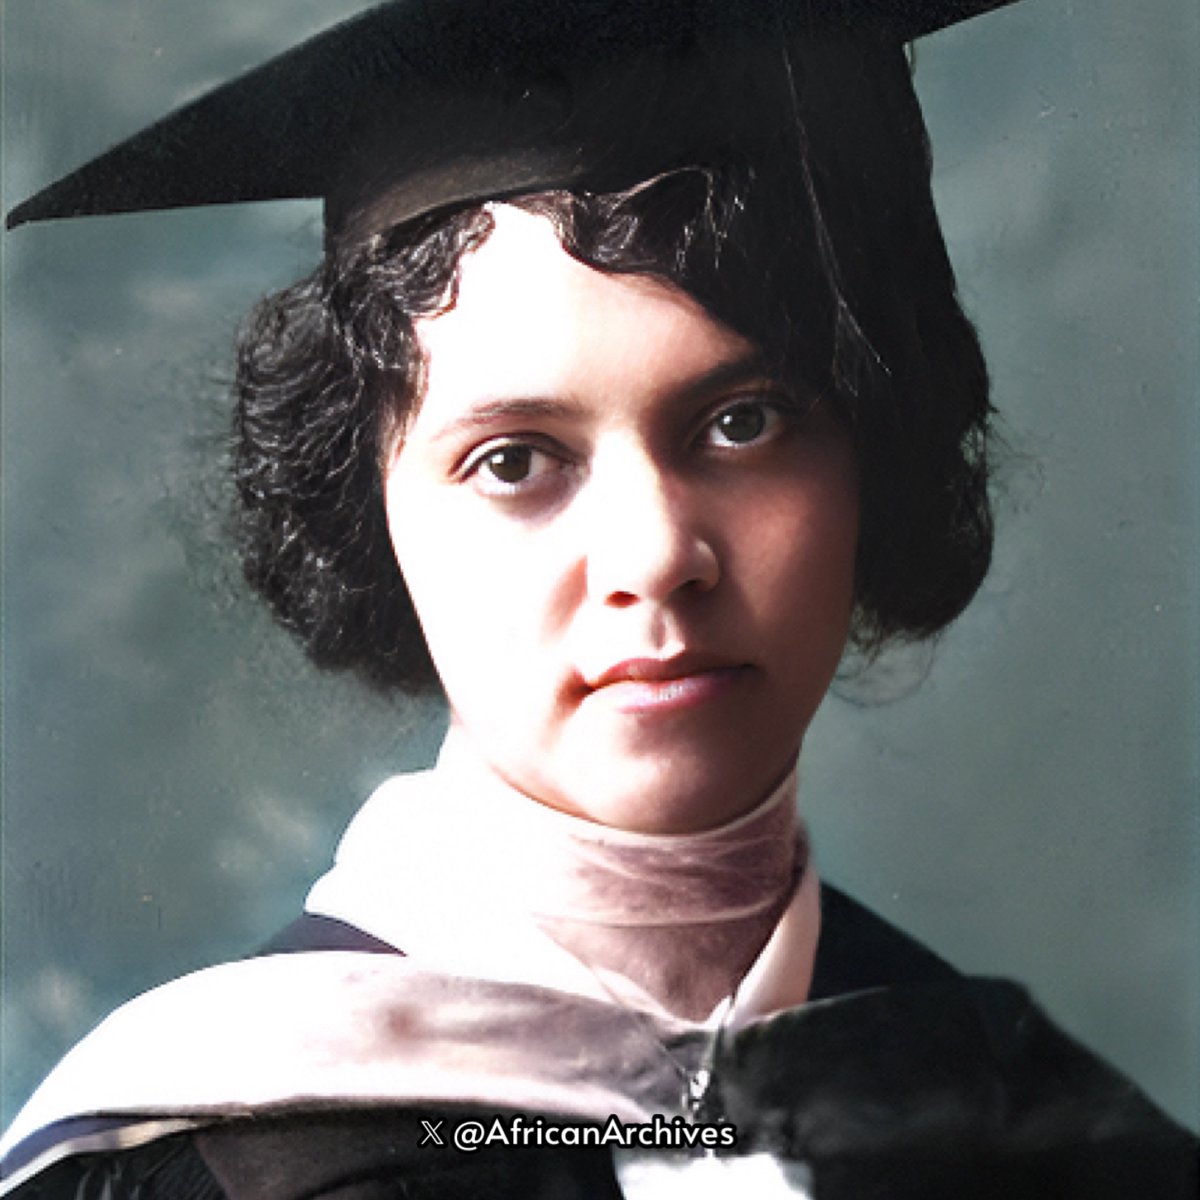 Alice Augusta Ball was a chemist who developed the first successful treatment for leprosy. Her solution was the most effective treatment for more than a quarter-century. She died young, at only 24, in 1916 but with a lasting legacy. —Alice Augusta Ball, a pharmaceutical…